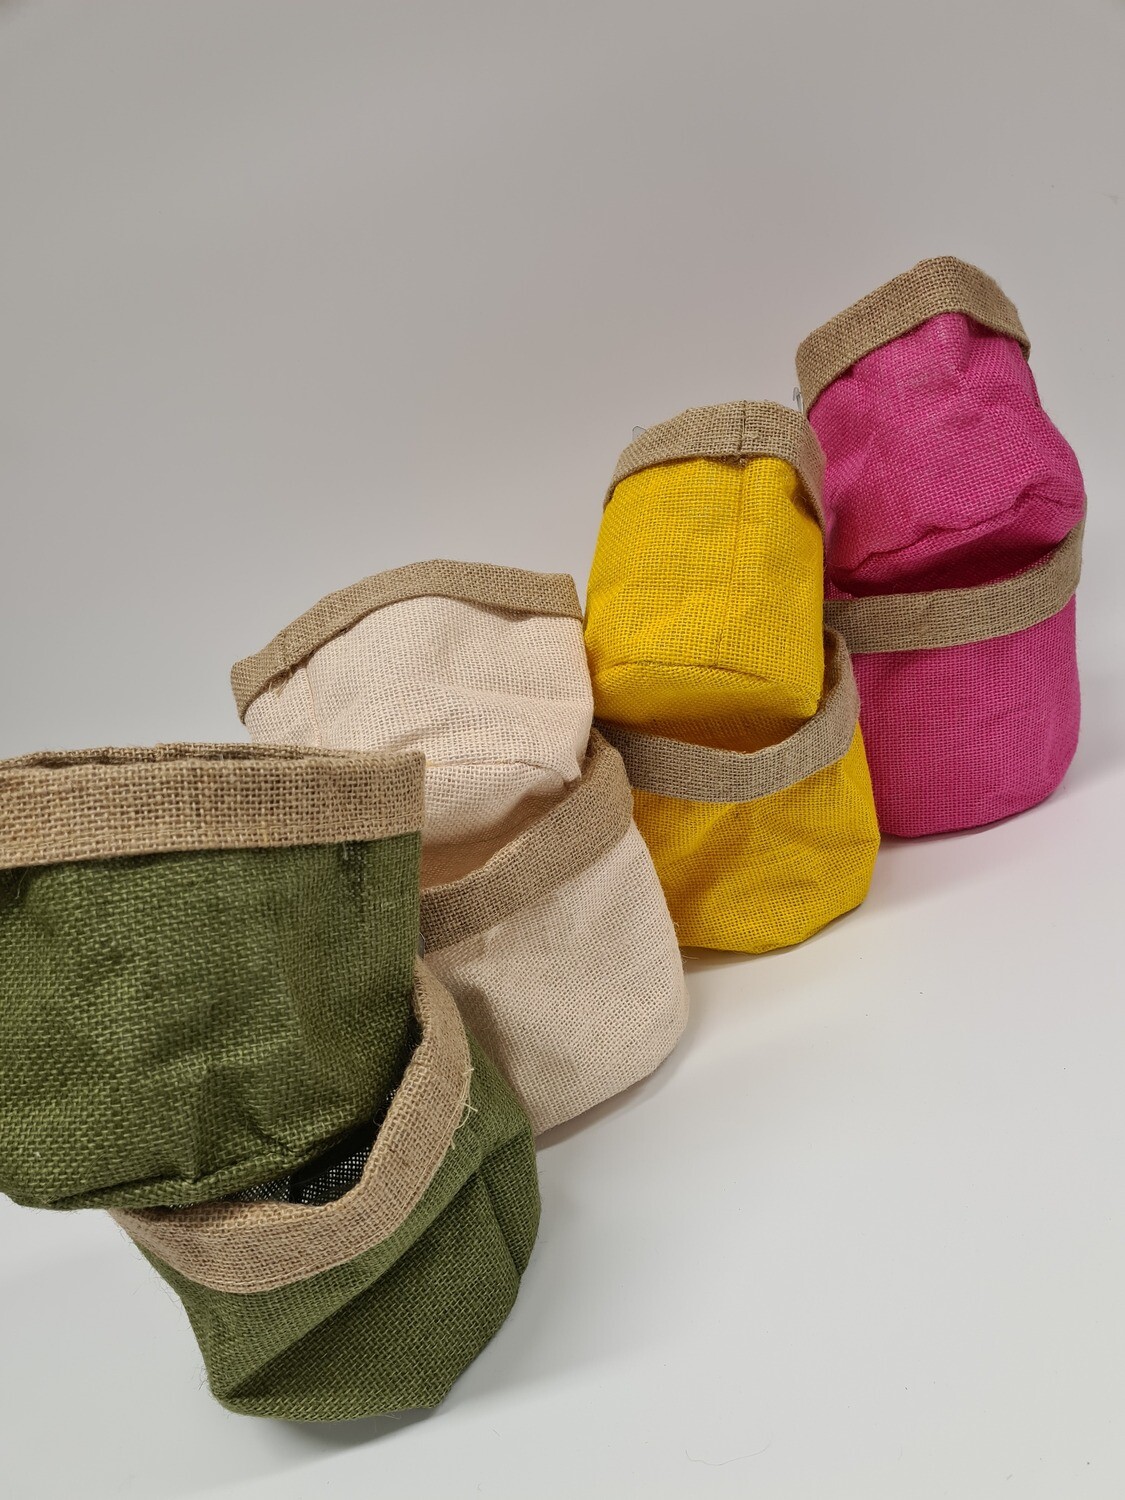 Hessian Bags with Liner Large